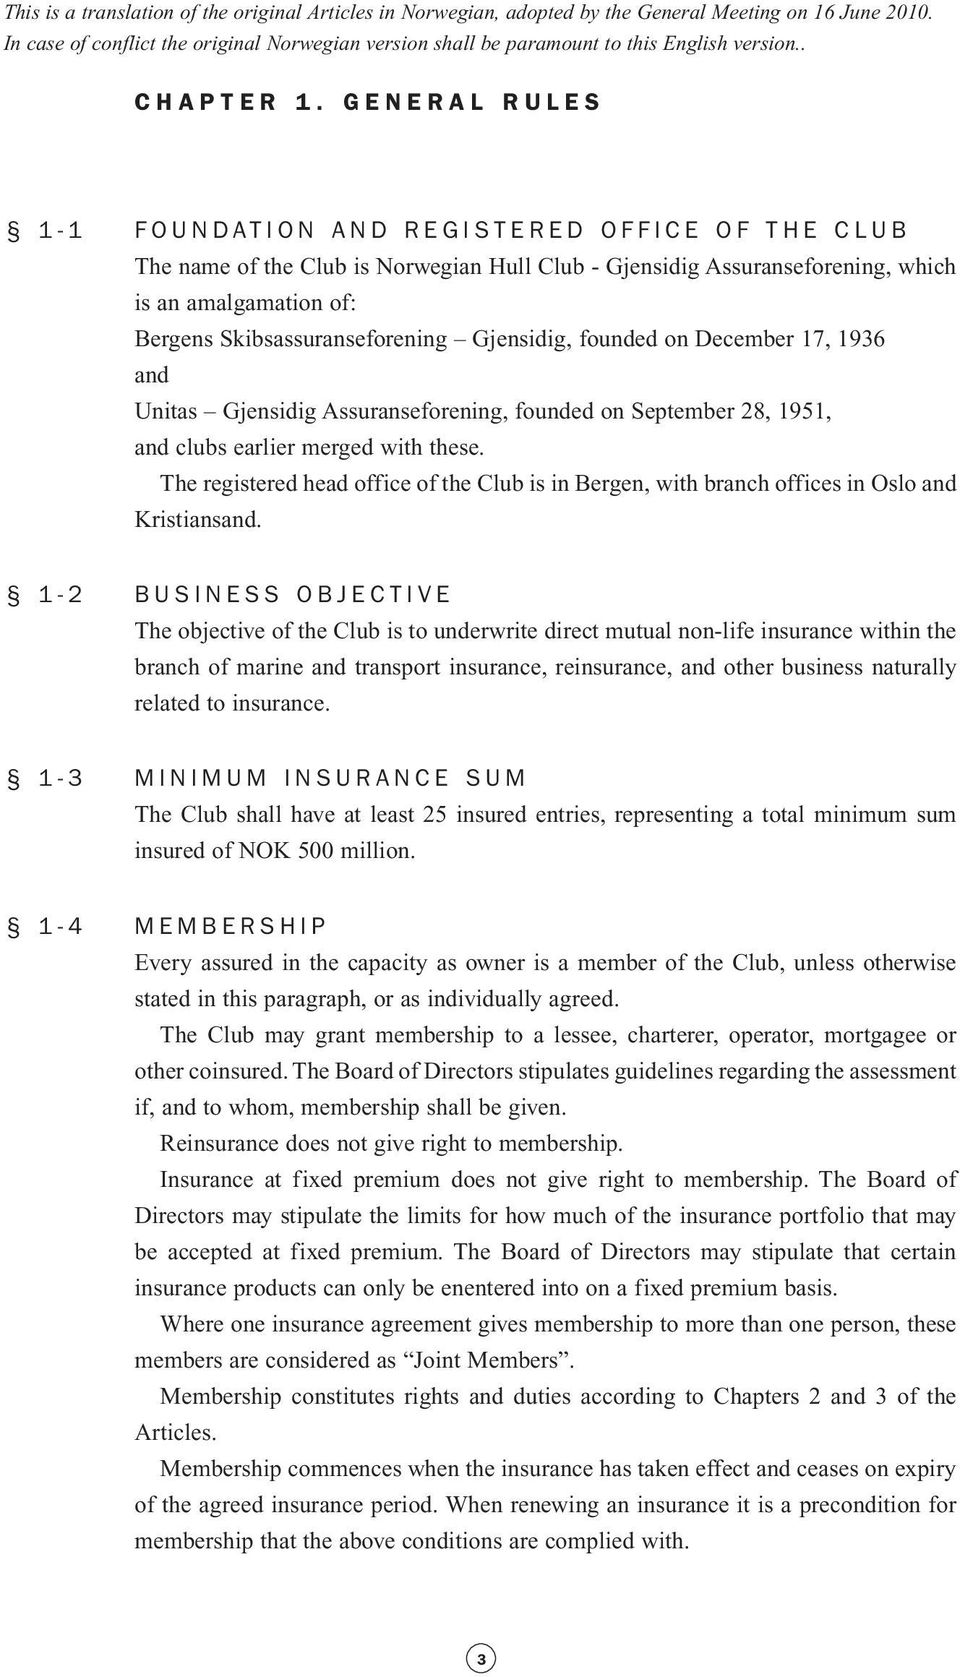 GENERAL RULES 1-1 FOUNDATION AND REGISTERED OFFICE OF THE CLUB The name of the Club is Norwegian Hull Club - Gjensidig Assuranseforening, which is an amalgamation of: Bergens Skibsassuranseforening